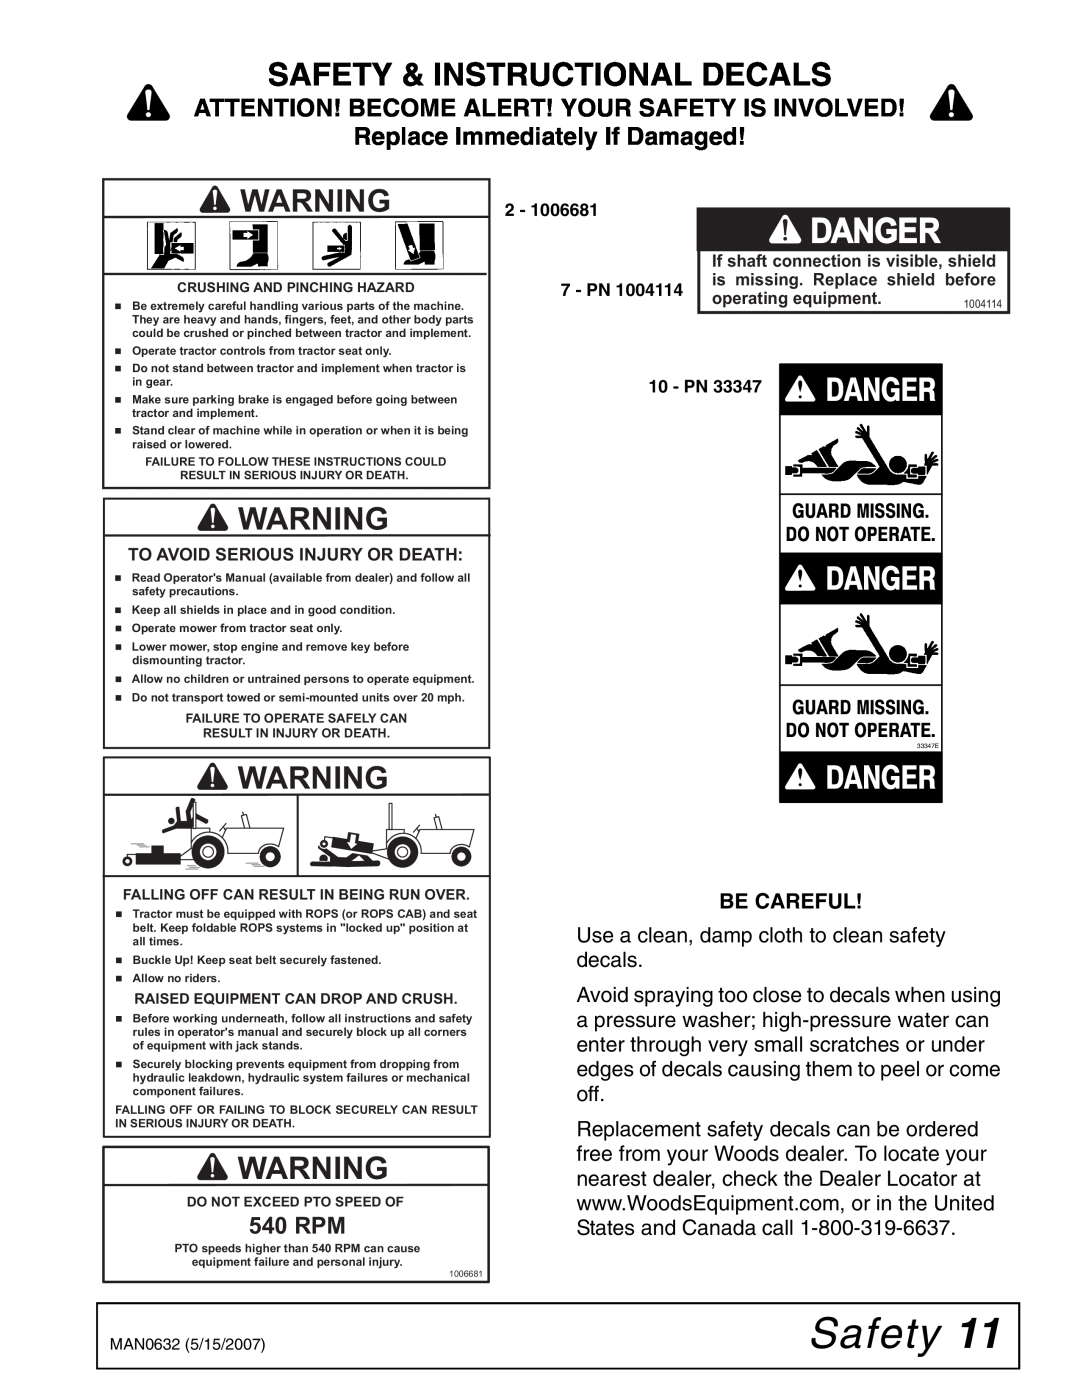 Woods Equipment BB72X Danger, 33347E, Safety & Instructional Decals, Attention! Become Alert! Your Safety Is Involved 